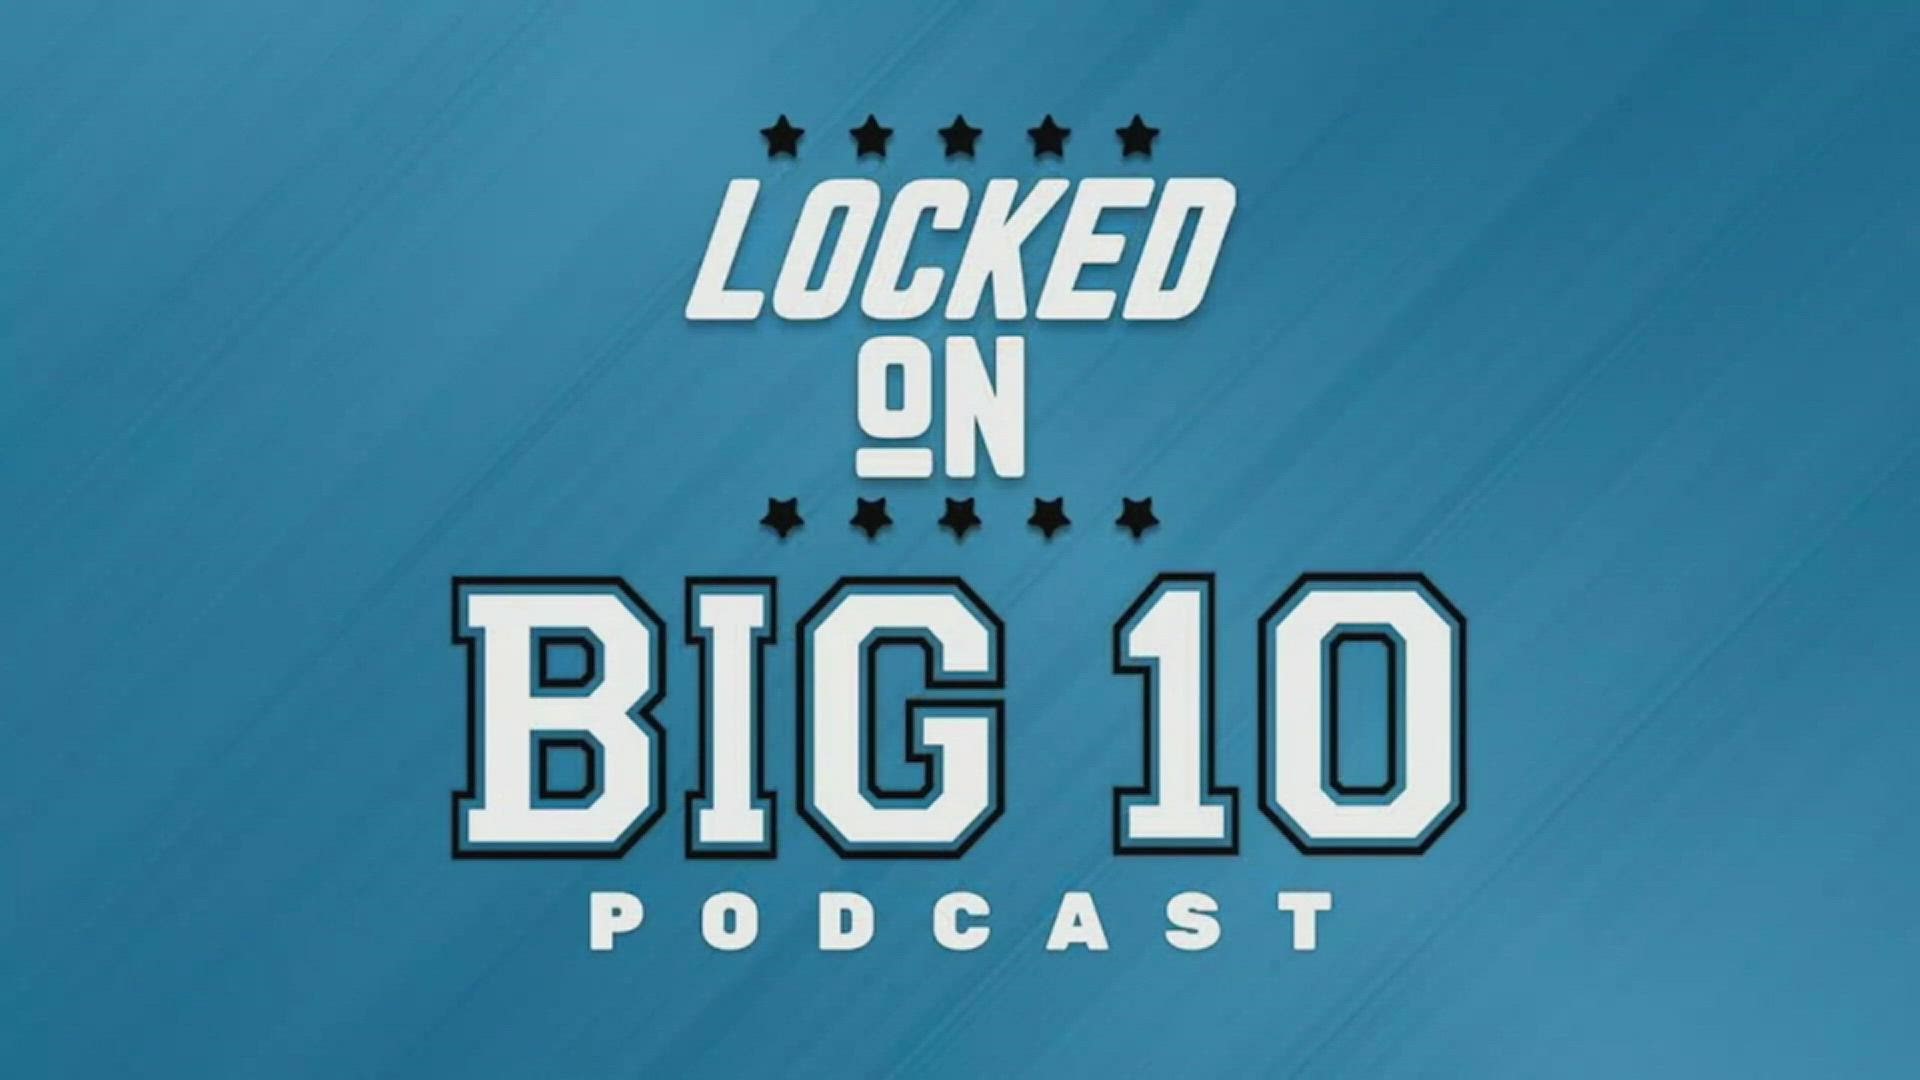 Matt Sheehan joins Nate Dickinson to discuss the latest Big Ten storylines and Week 1 betting lines.